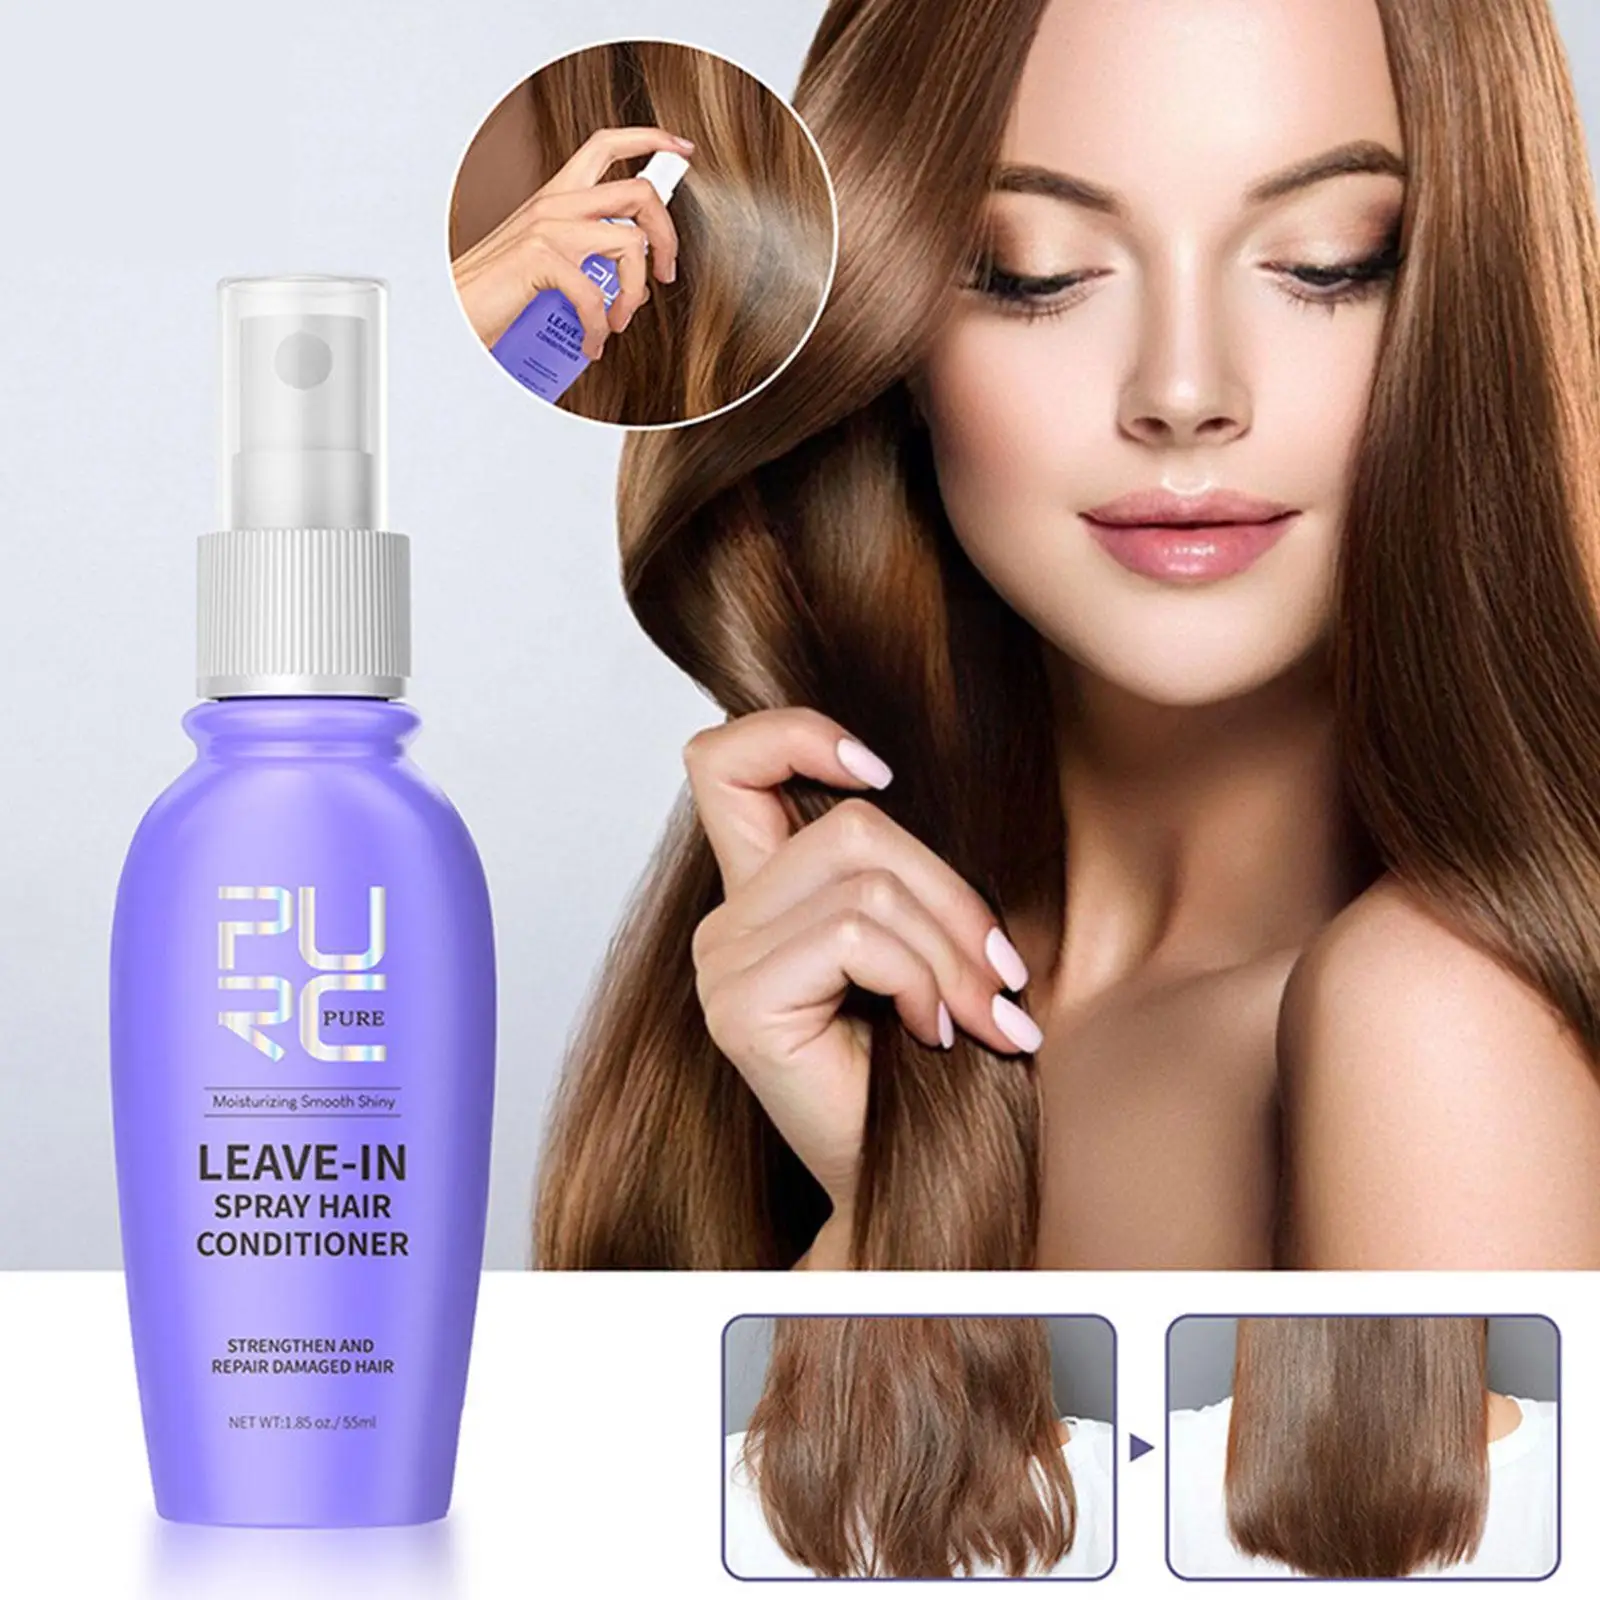 

Coconut Oil Leave-In Spray Conditioner Hair Treatment Shiny Smooth 50ml Hair Dry Repair Sprays Straightening Frizz Care F7M1